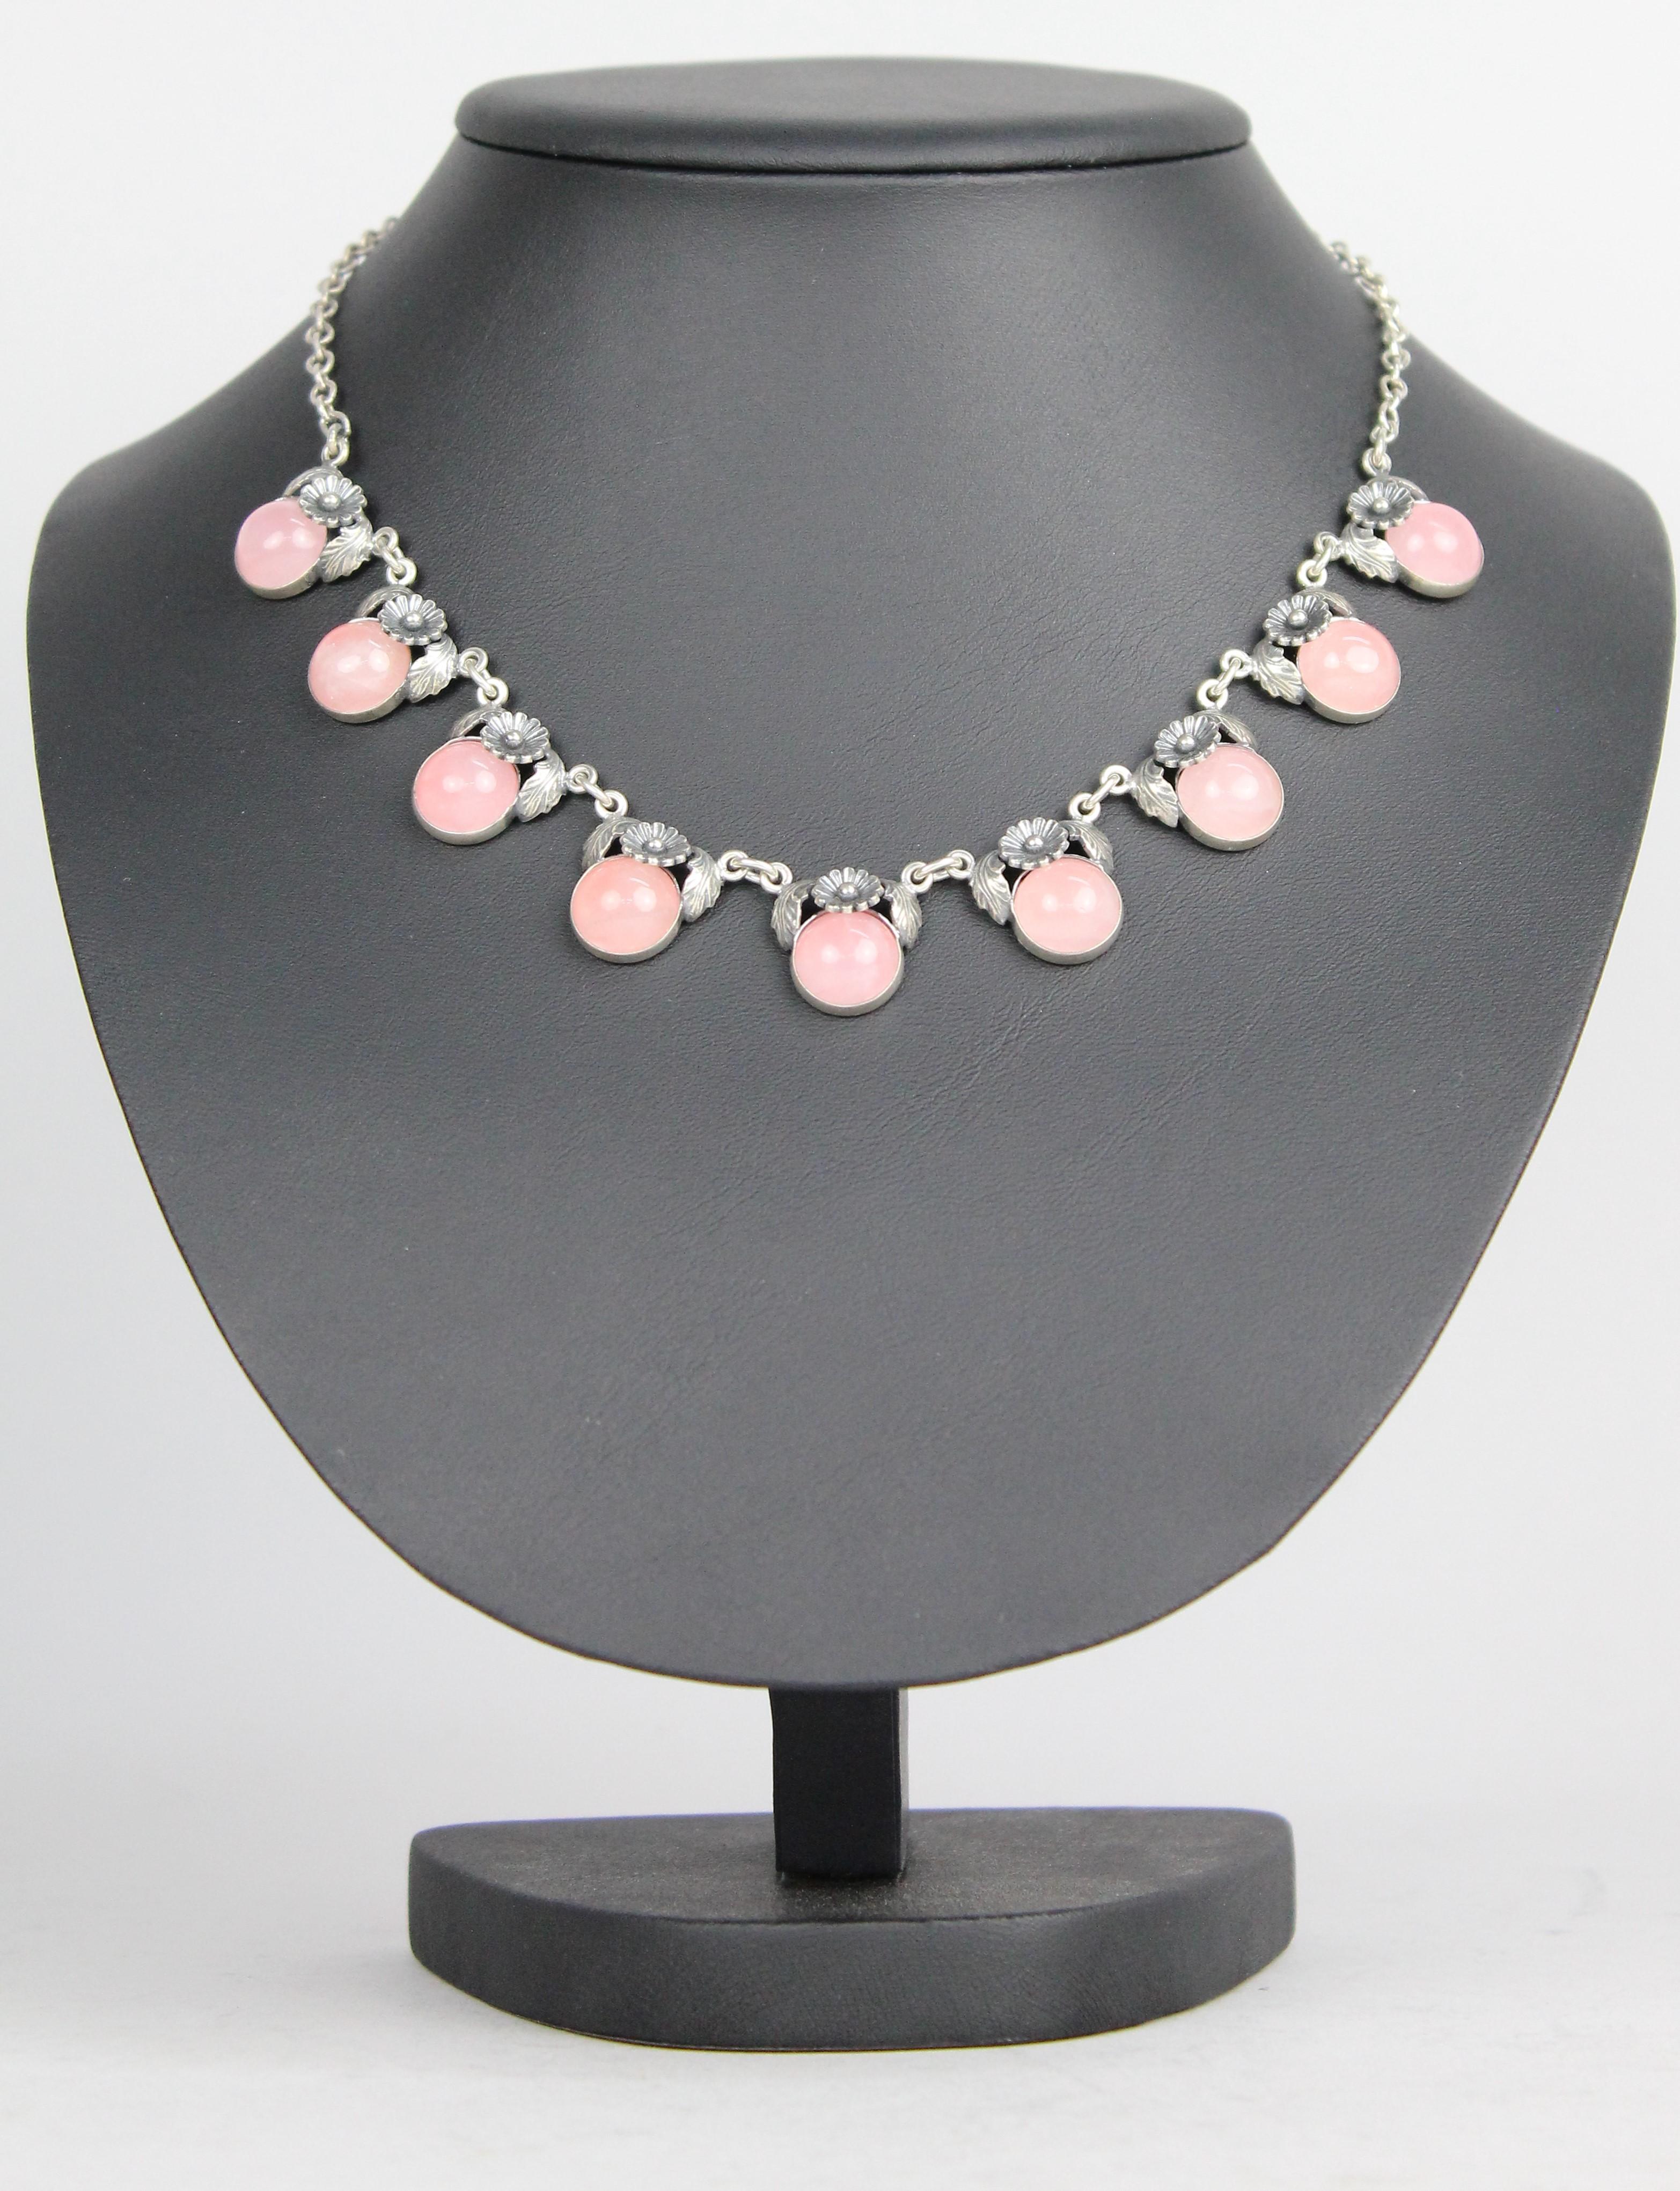 Niels Erik From, Scandinavian Modernist Necklace in Silver and Cabochon Cut Rose Quartz.

Very nice necklace in sterling silver by Danish jewelry designer N E From.
Nice vintage condition.

NIELS ERIK FROM
The Danish silversmith Niels Erik From